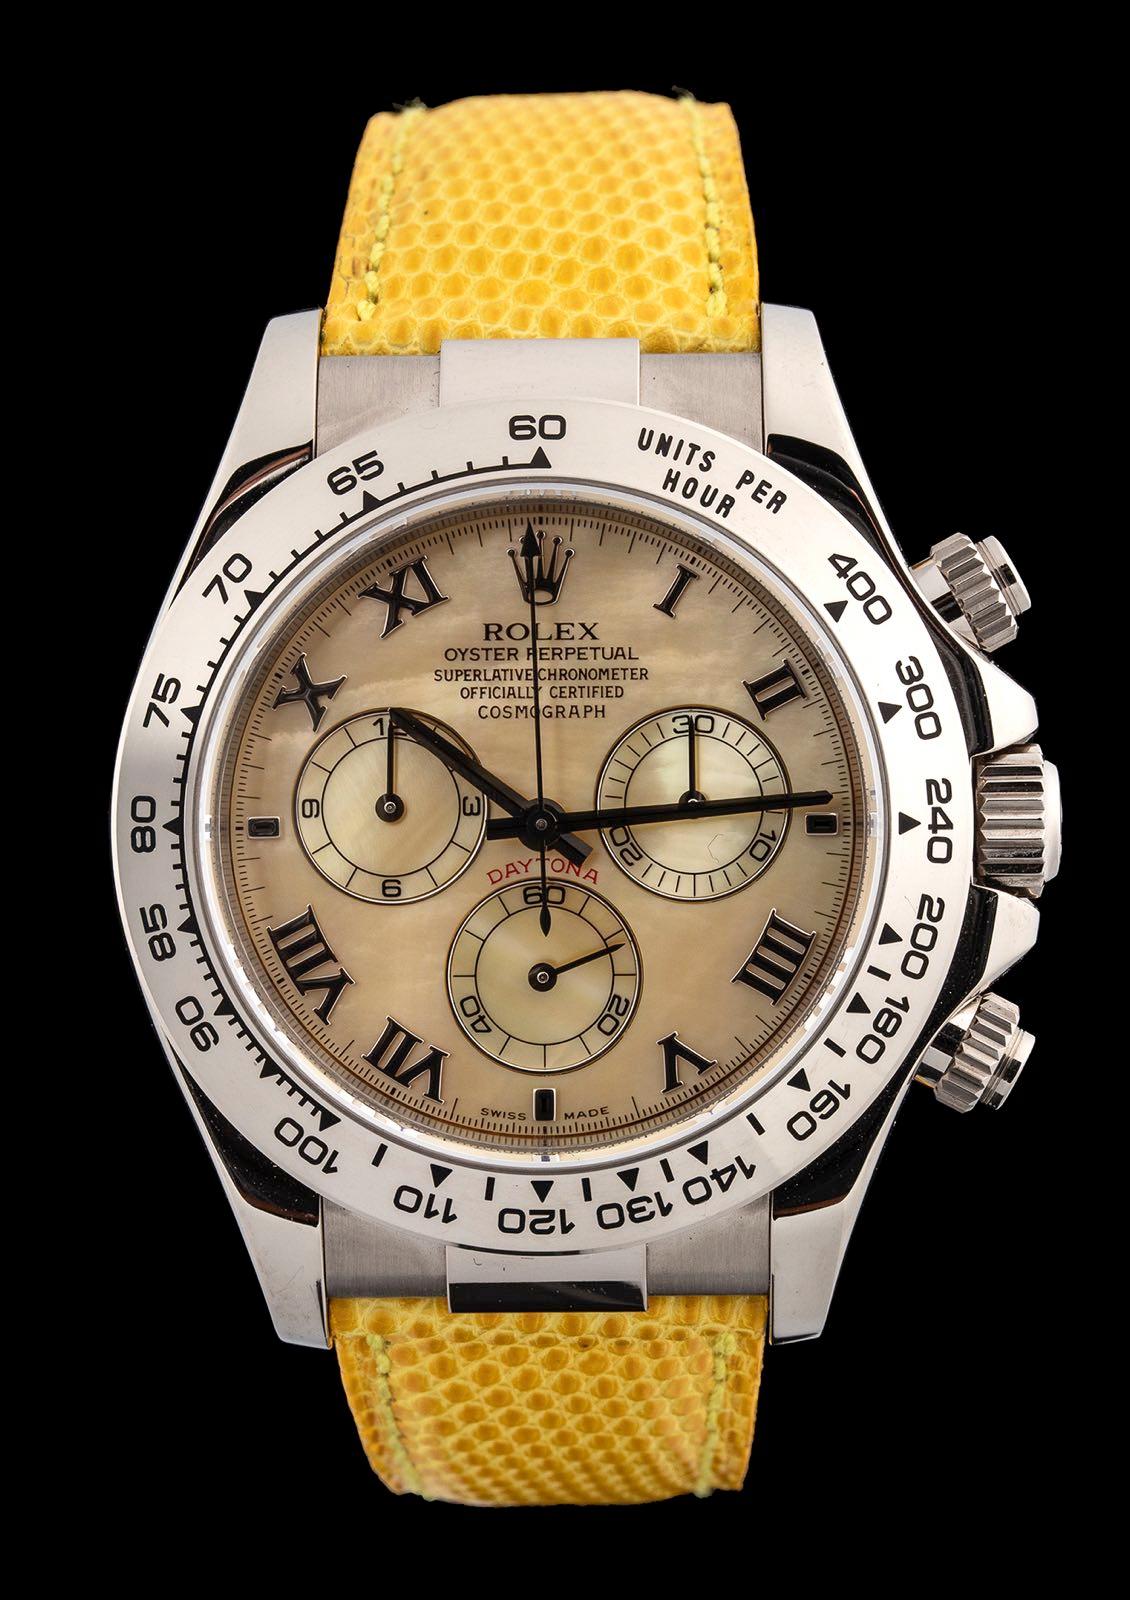 Brand: Rolex
Model Name: Daytona “Beach”
Reference: 116519
Metal:  White Gold
Metal Purity: 18k
Stone: Yellow Mother of Pearl
Case Size:  40 mm
Case Back: Solid
Strap: Yellow Lizard Leather
Hour Markers:  Roman Numerals
Features: Hours, Minutes,